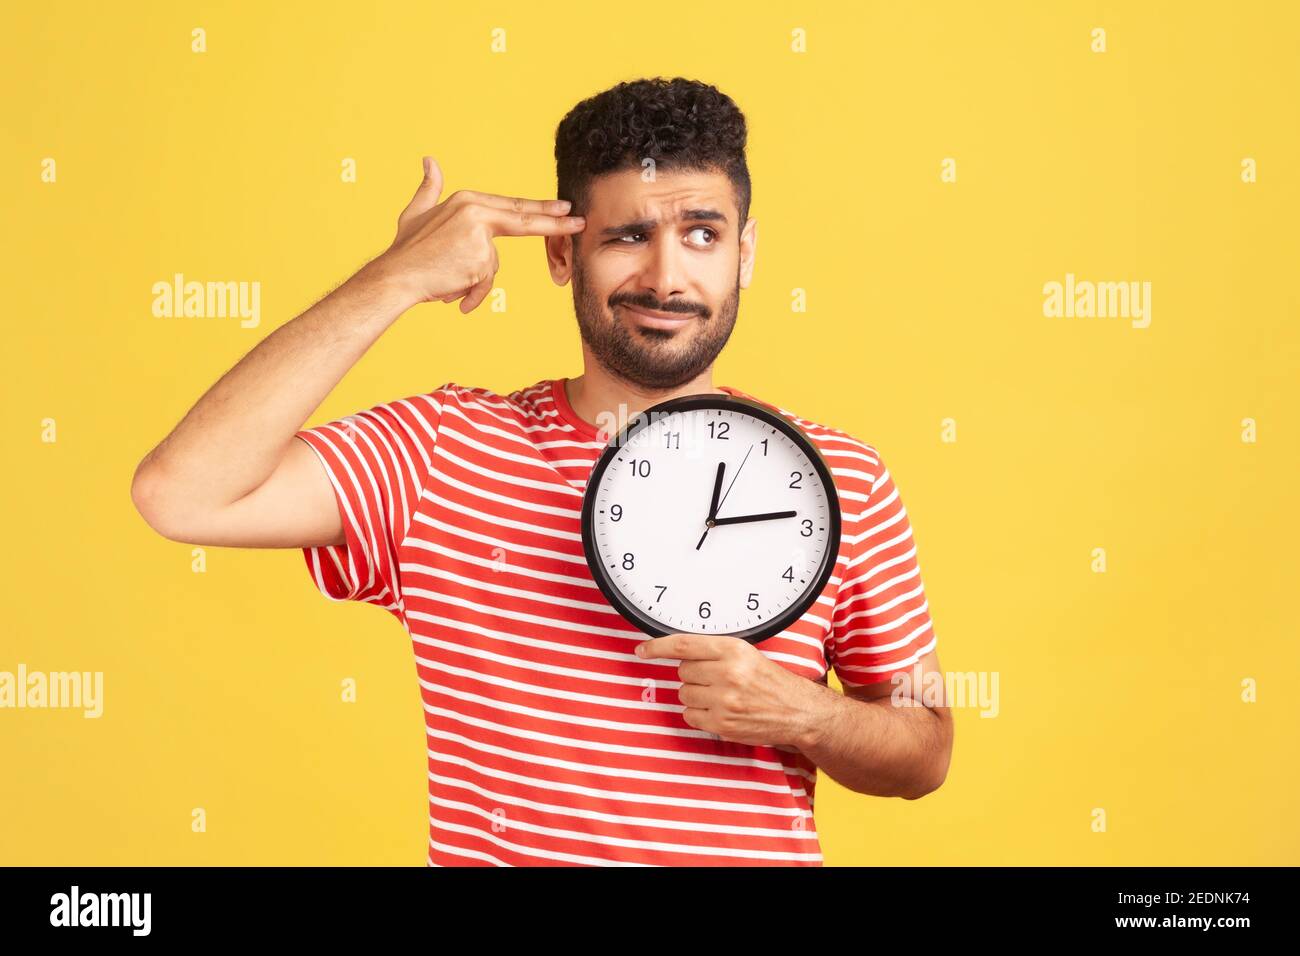 Kill me please. Busy unhappy bearded man in striped t-shirt holding fingers near temple like gun going to make shot holding big wall clock, deadline. Stock Photo